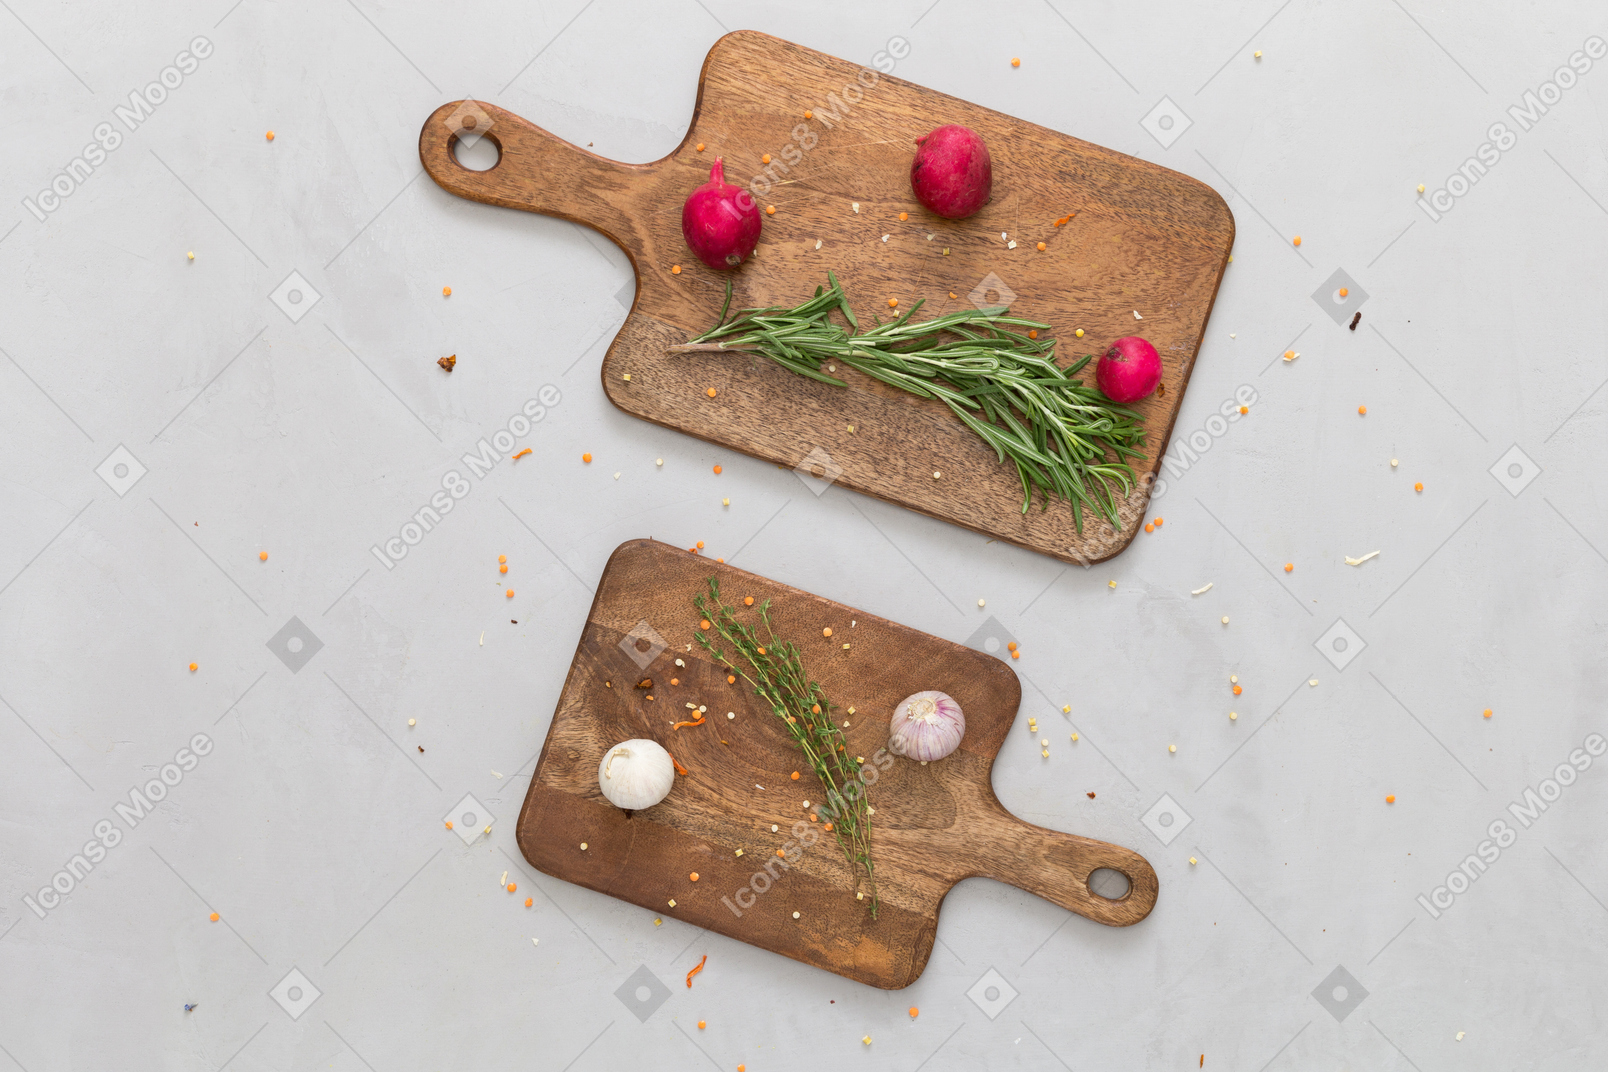 Red radishes, garlic and herbs served on wooden cutting boards